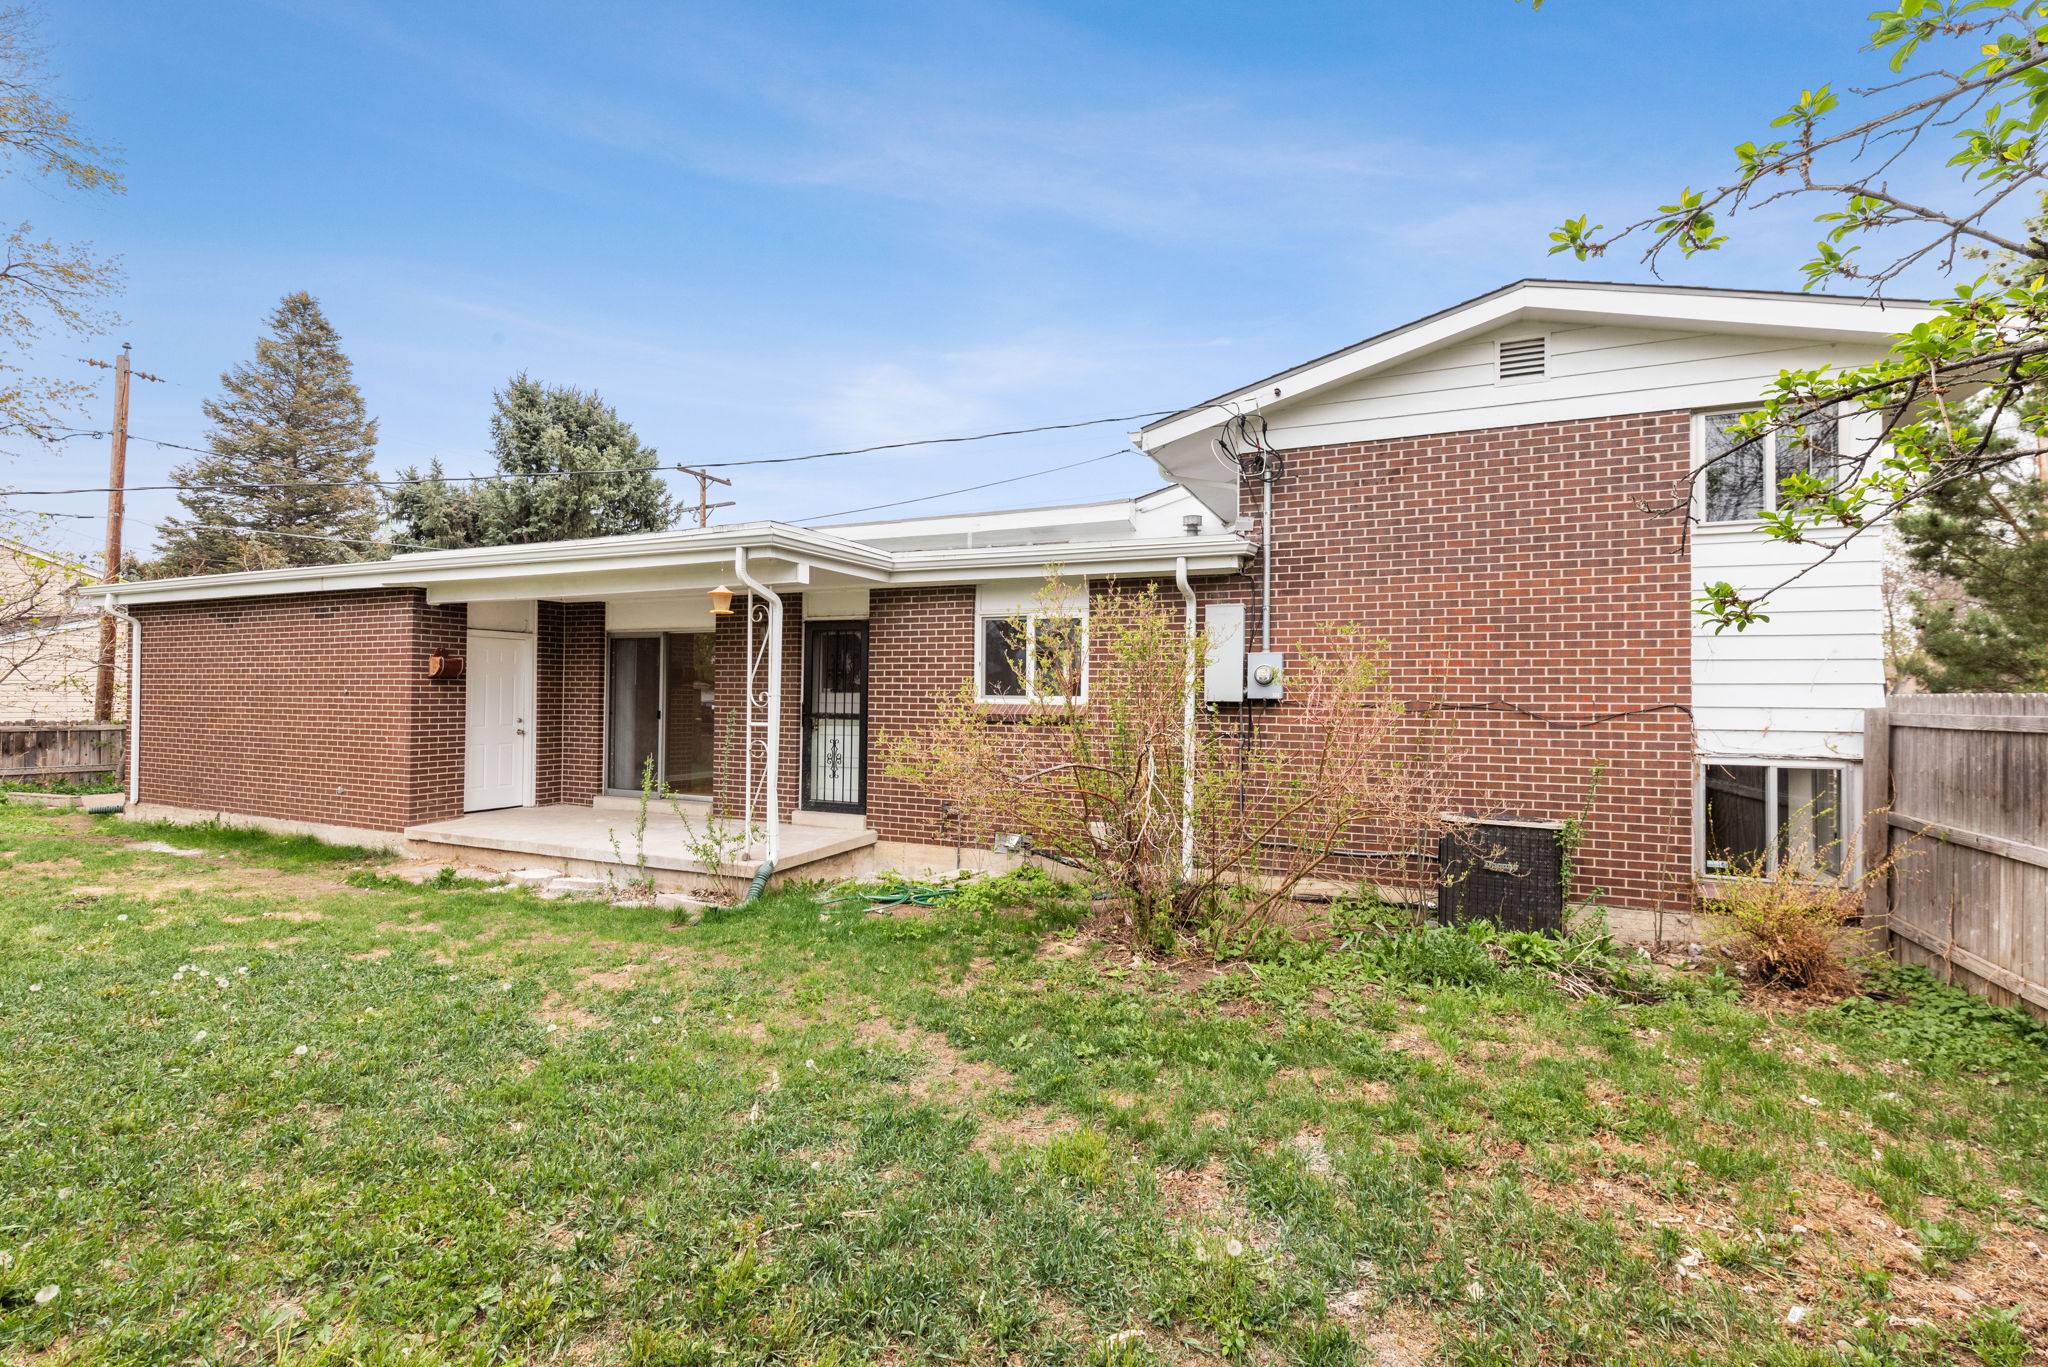  11921 W 60th Ave, Arvada, CO 80004, US Photo 22